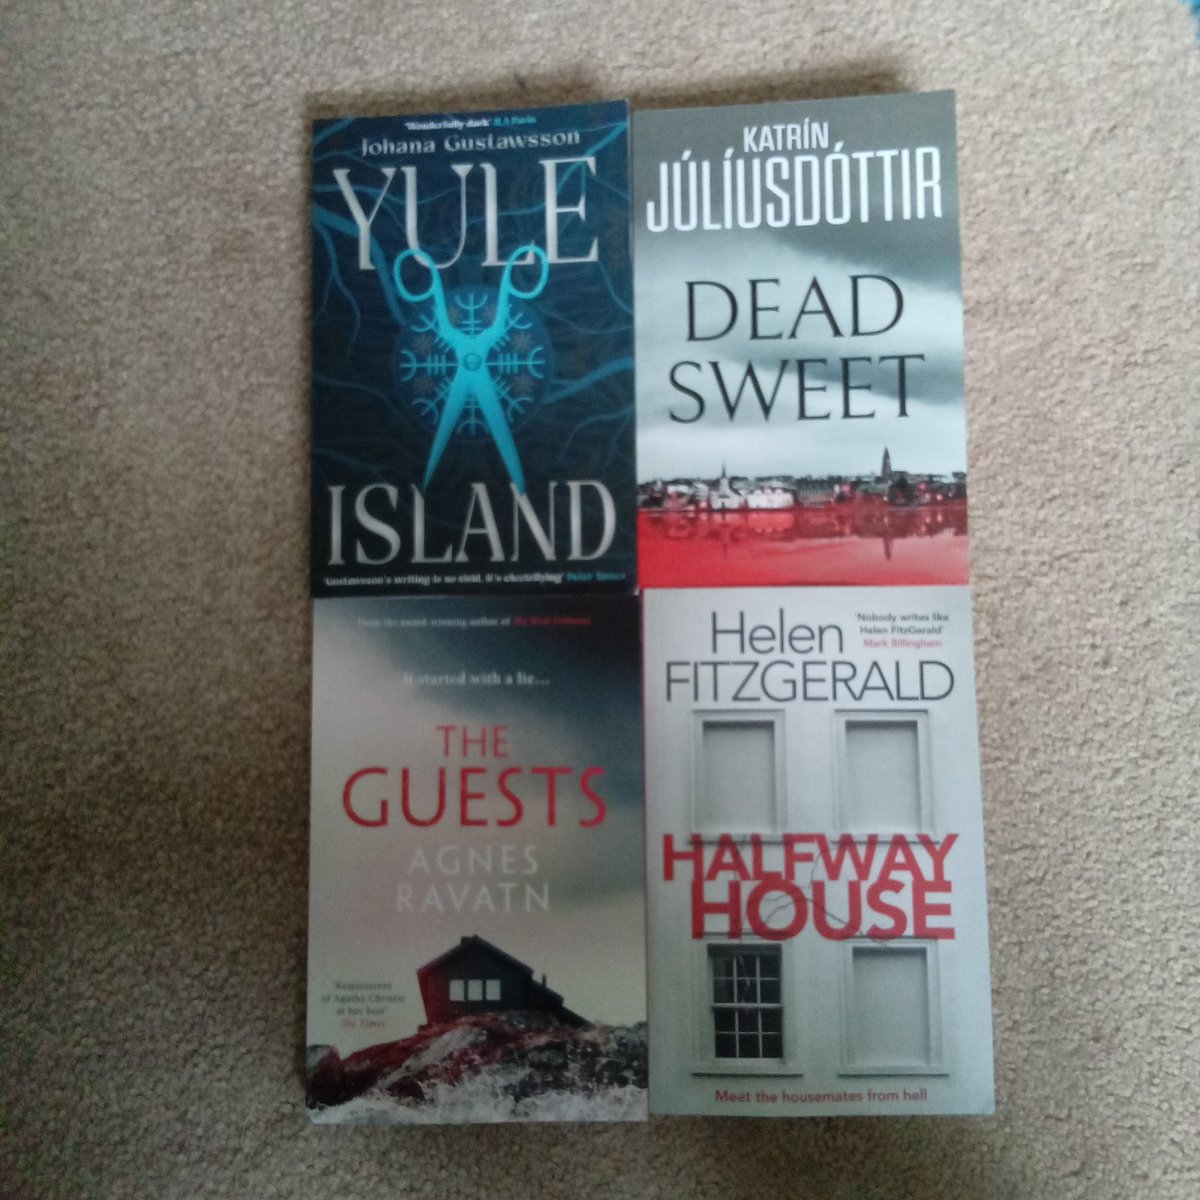 Many many thanks to @OrendaBooks for my wonderful selection of proofs. I can't wait to start reading them. #YuleIsland and #DeadSweet are published in December and #HalfwayHouse and #TheGuests in January.